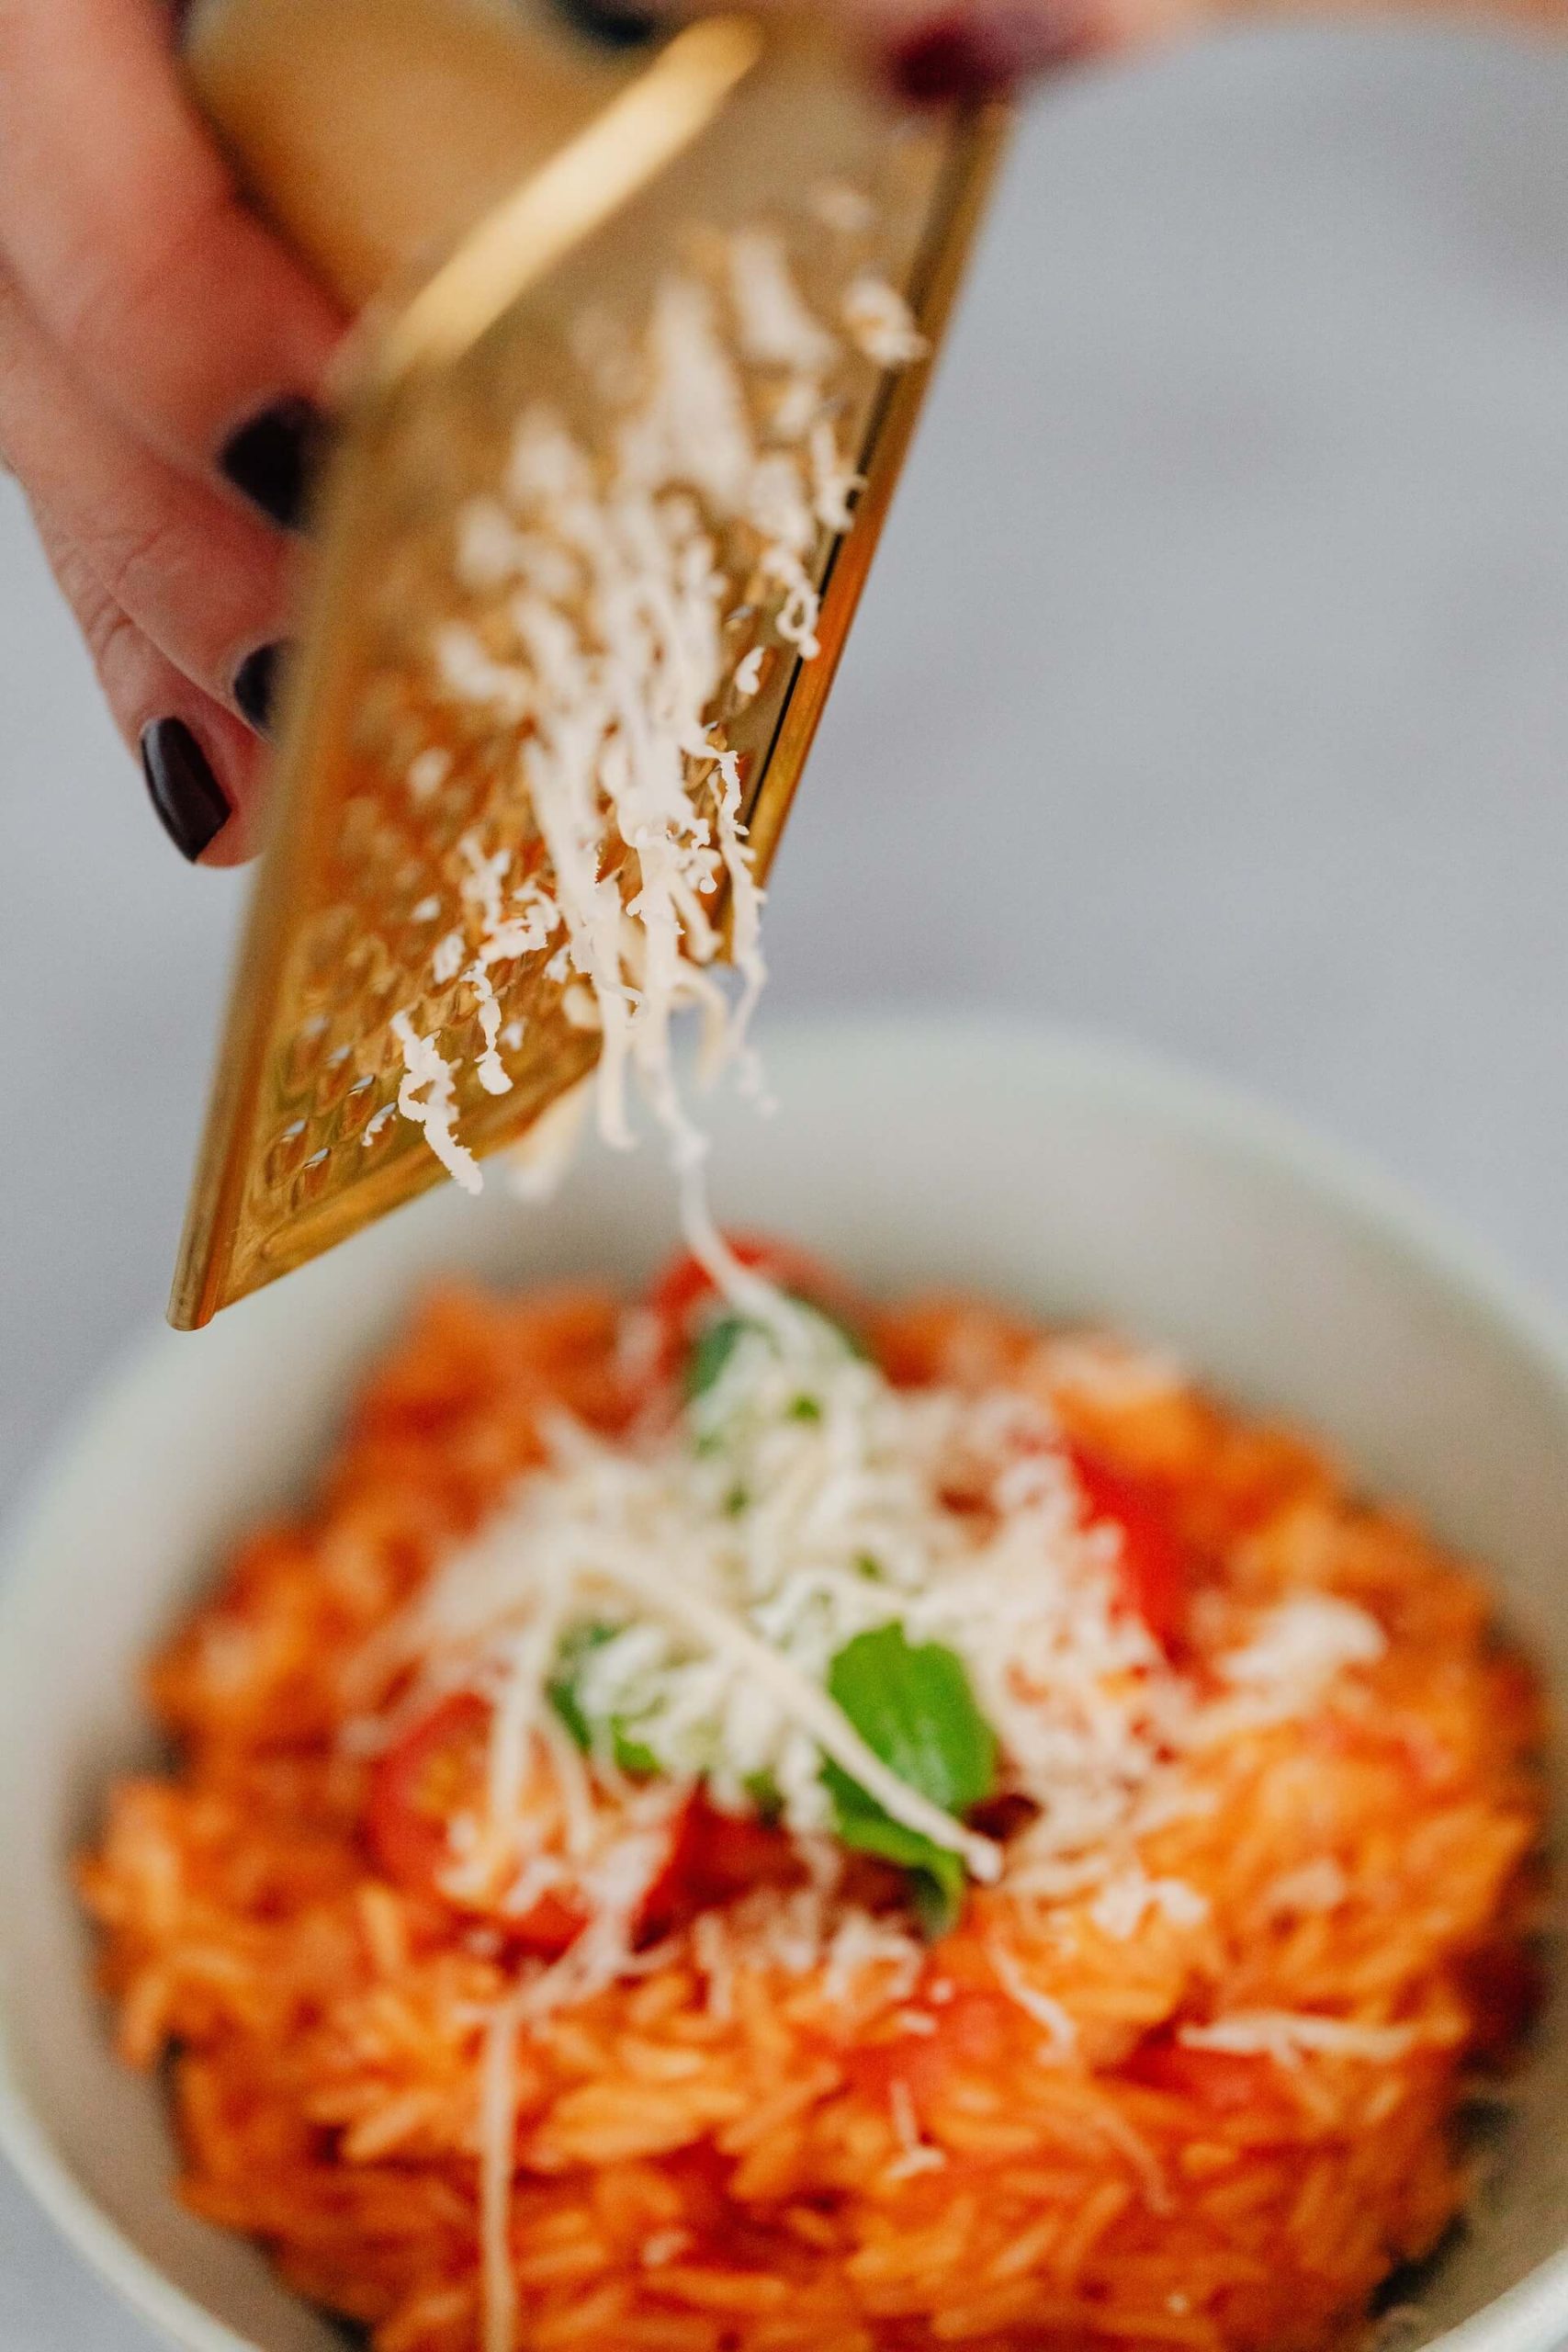 A sun dried tomato risotto with cheese in a plate